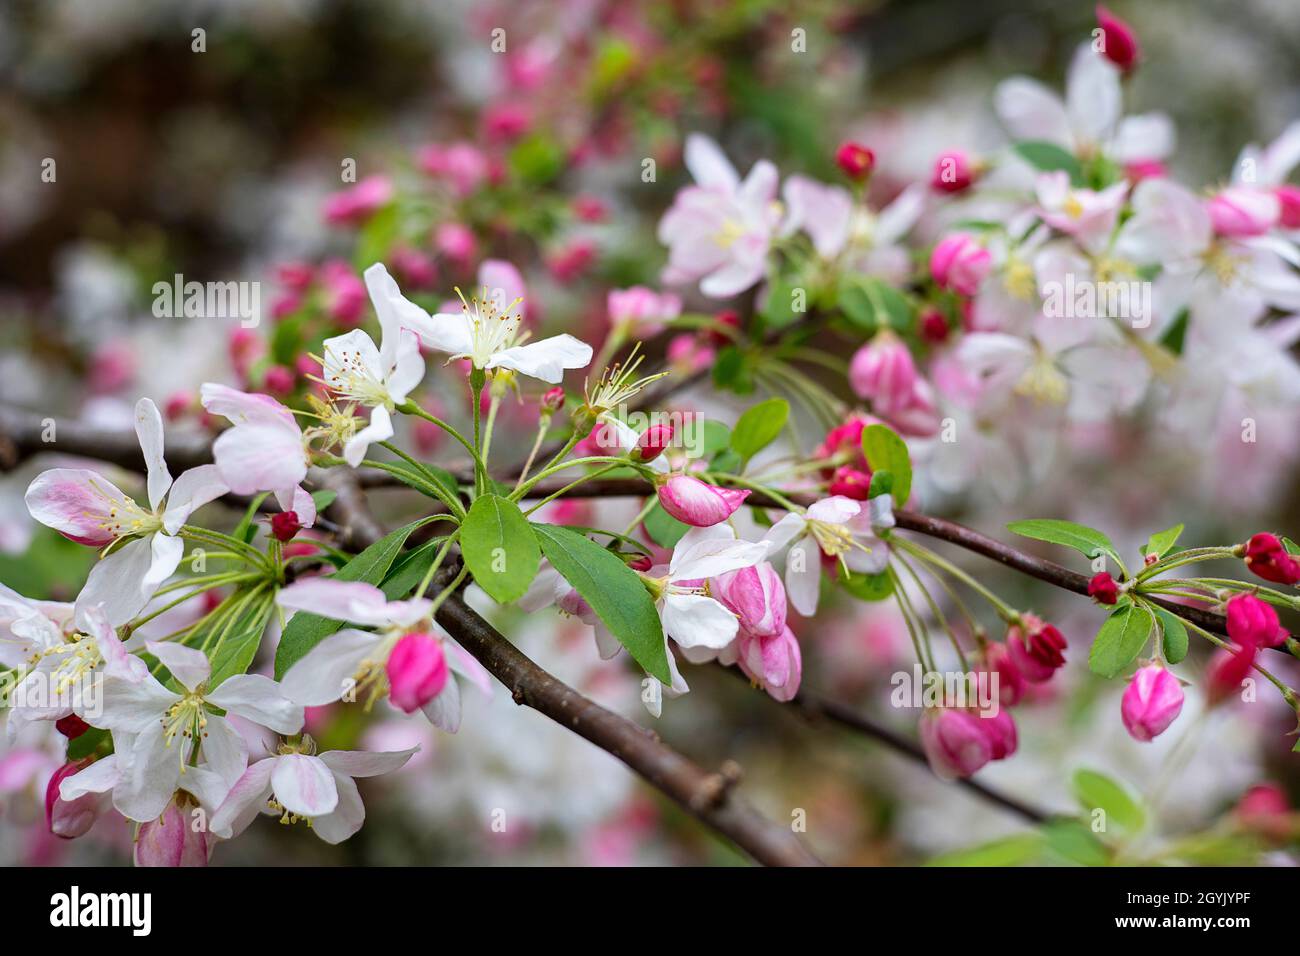 Chinese crabapple flowers in bloom Stock Photo